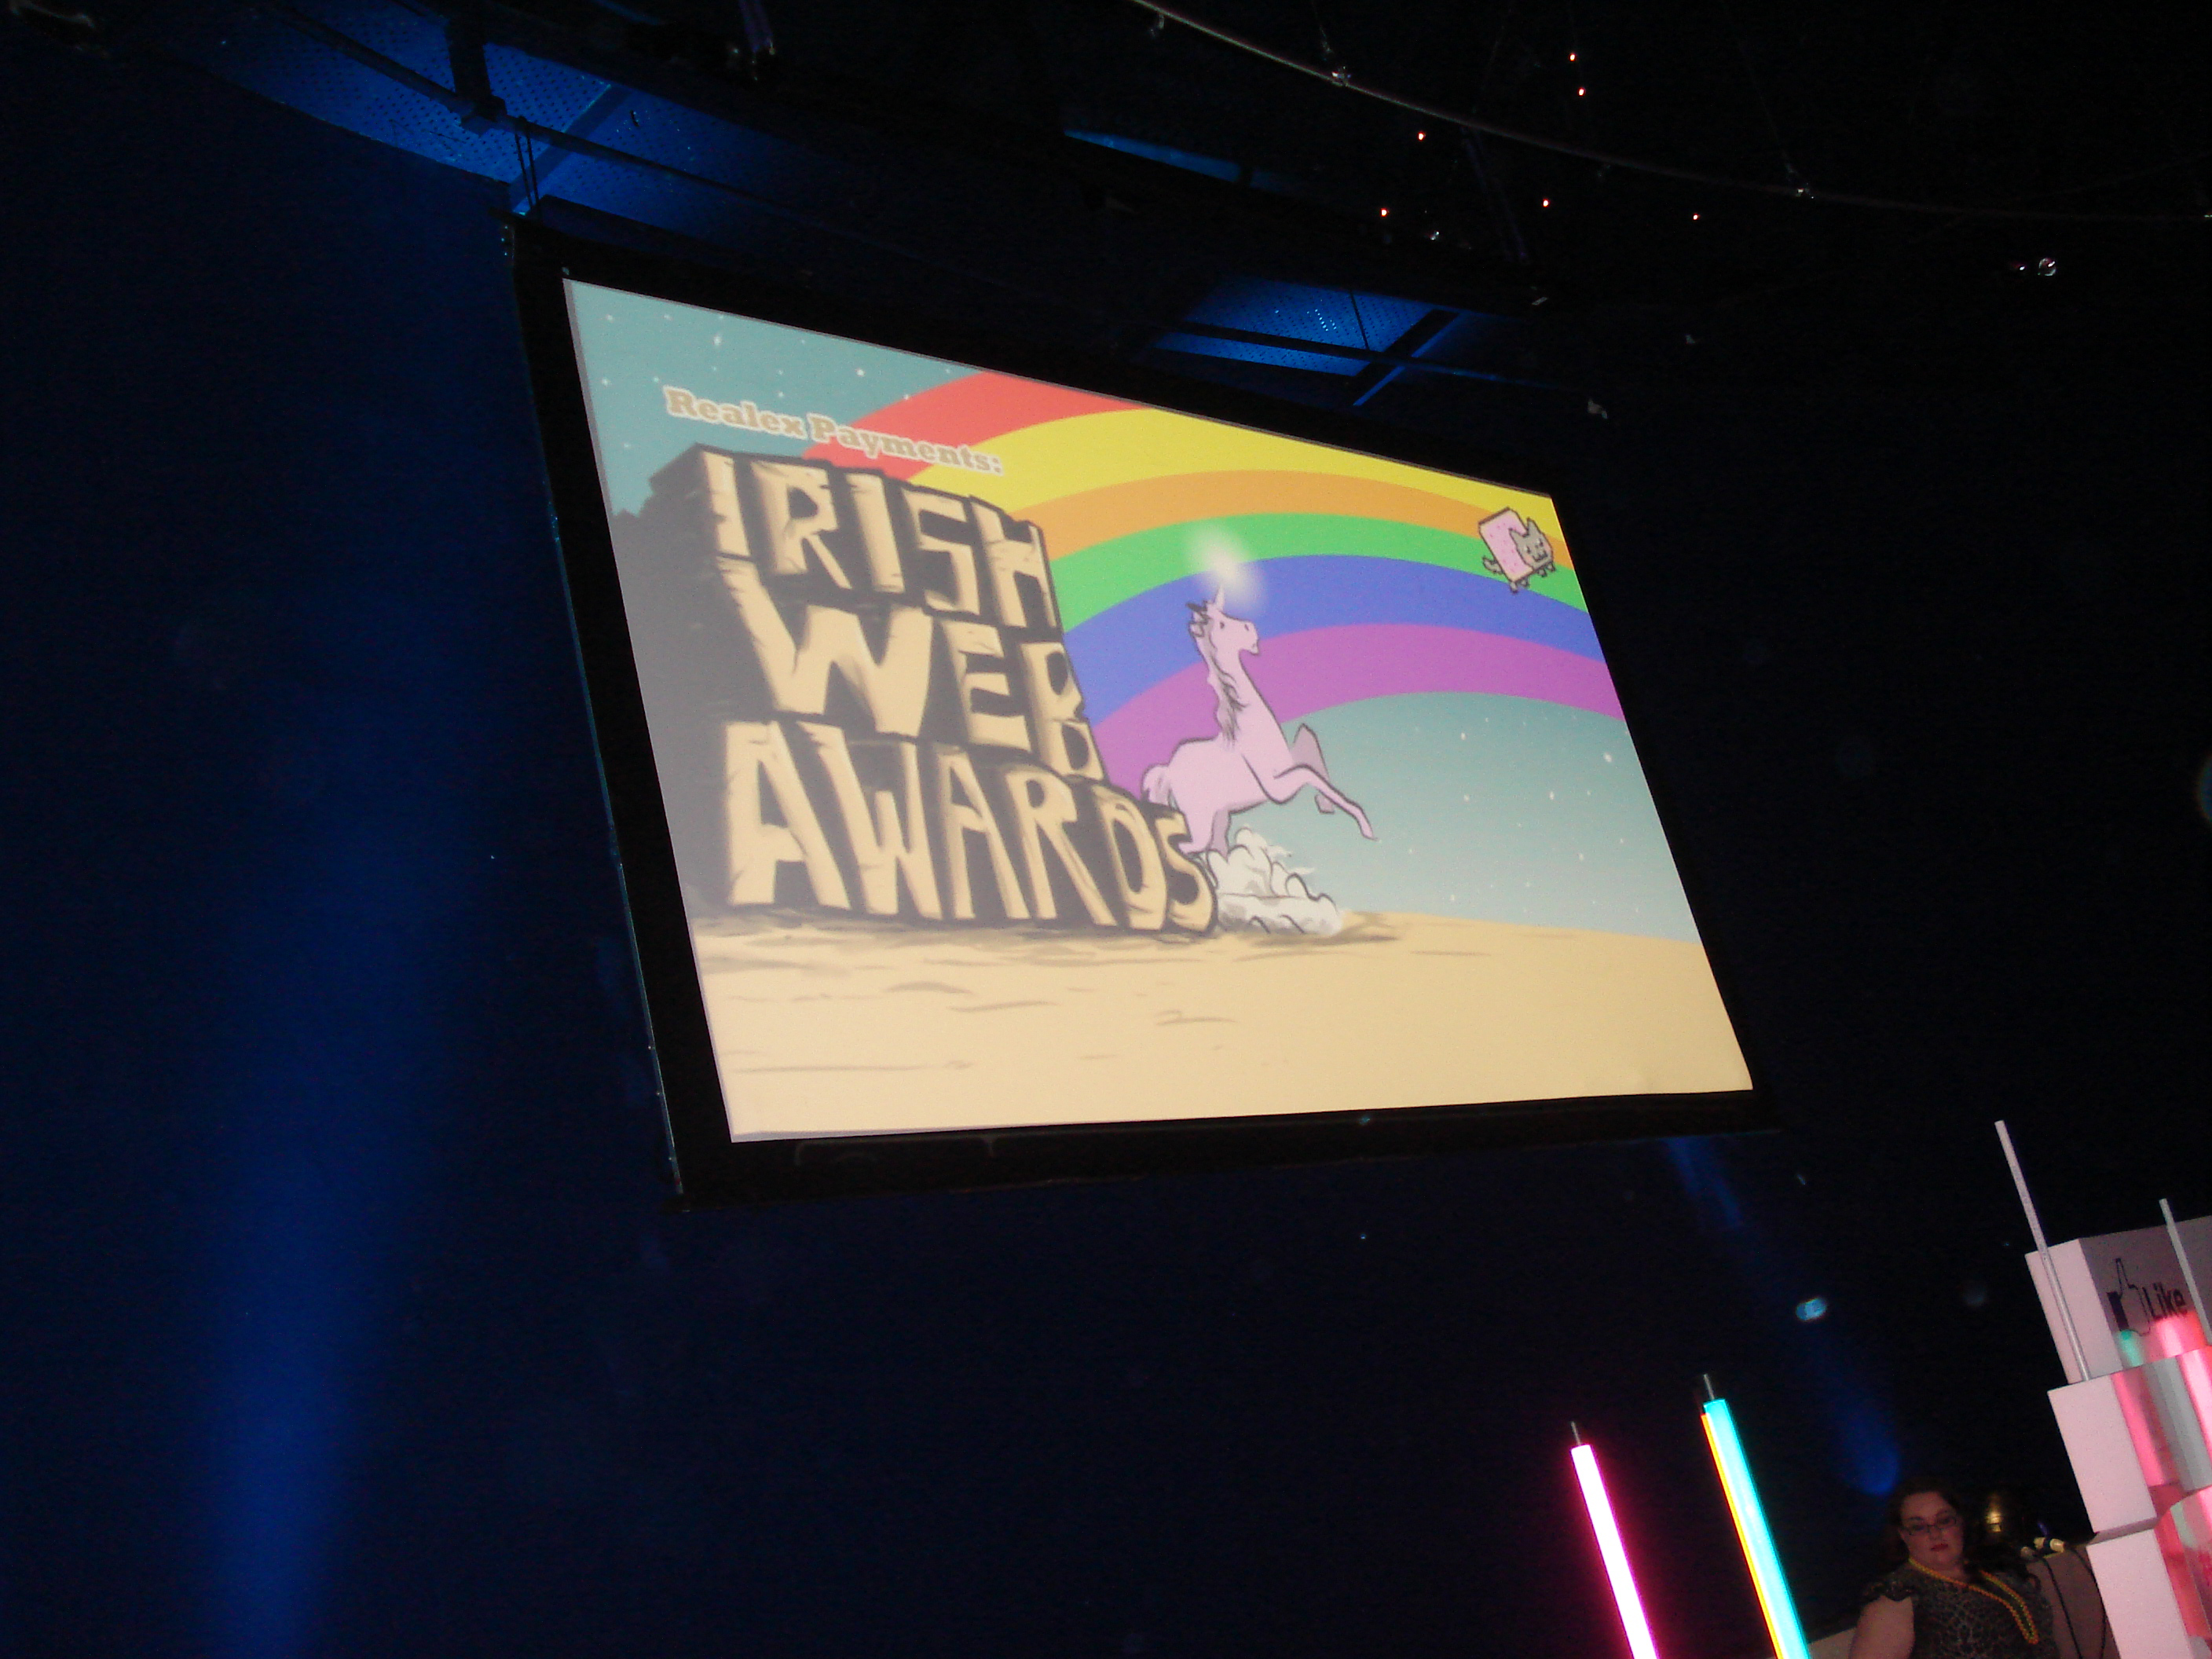 Brilliant graphics for the awards